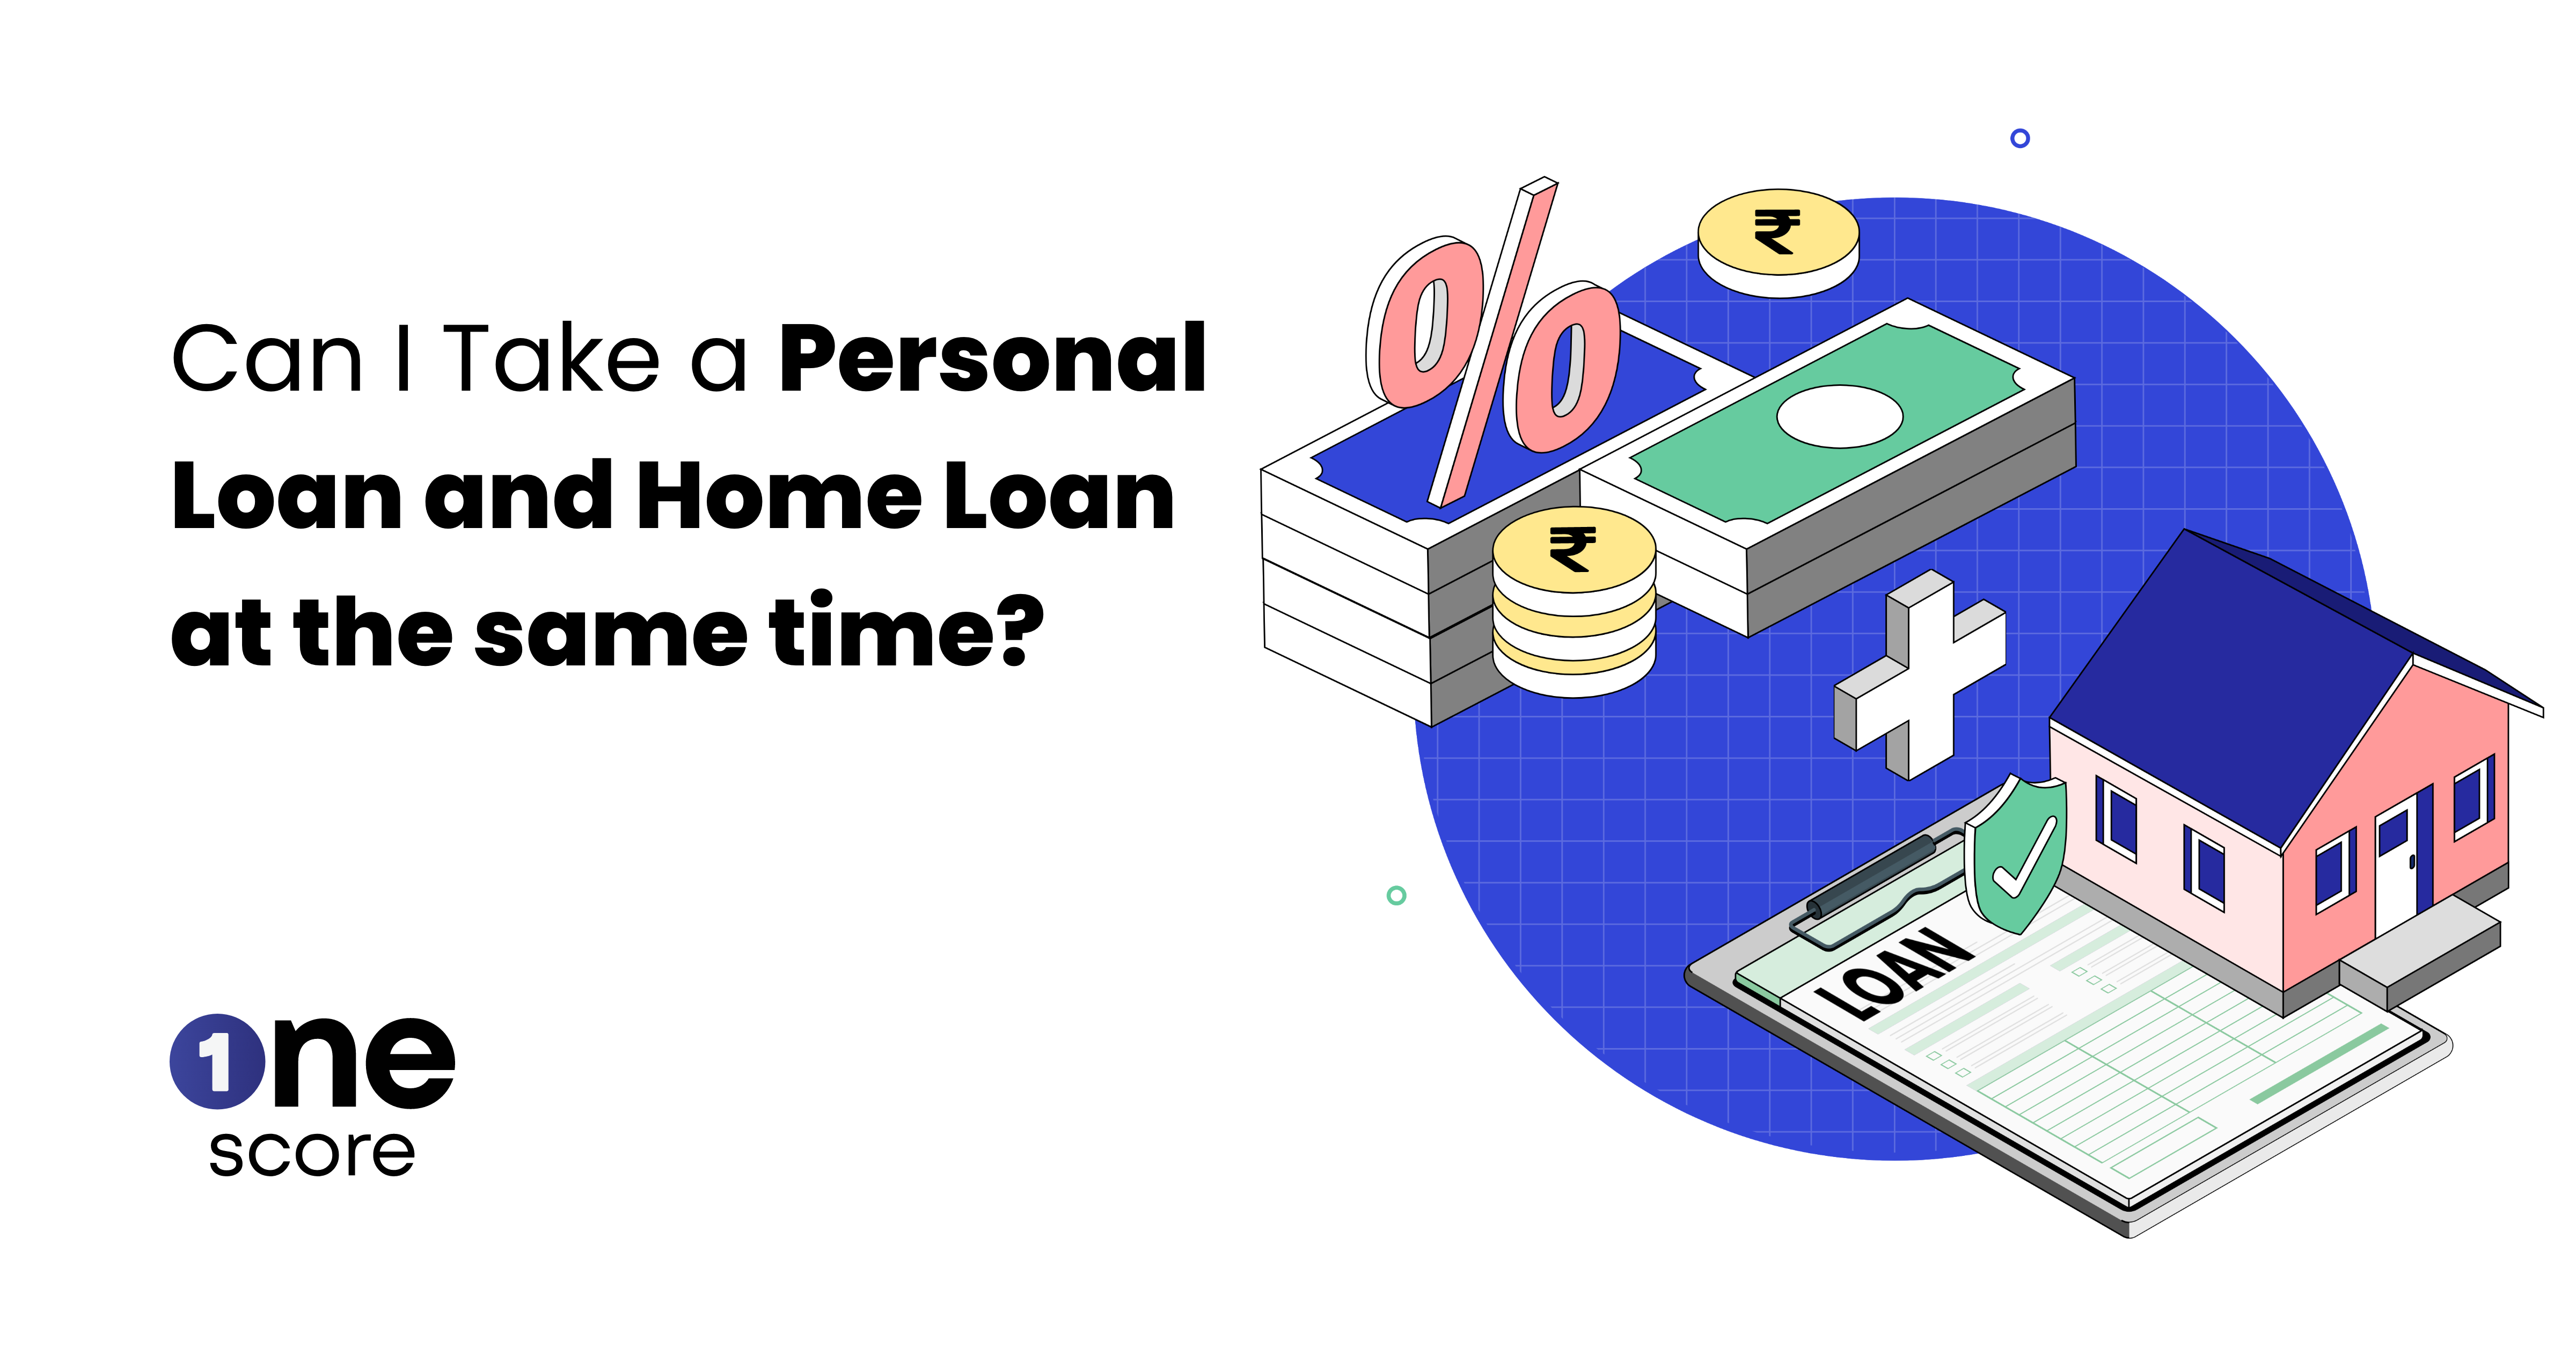 I have a home loan. Can I still take a personal loan?